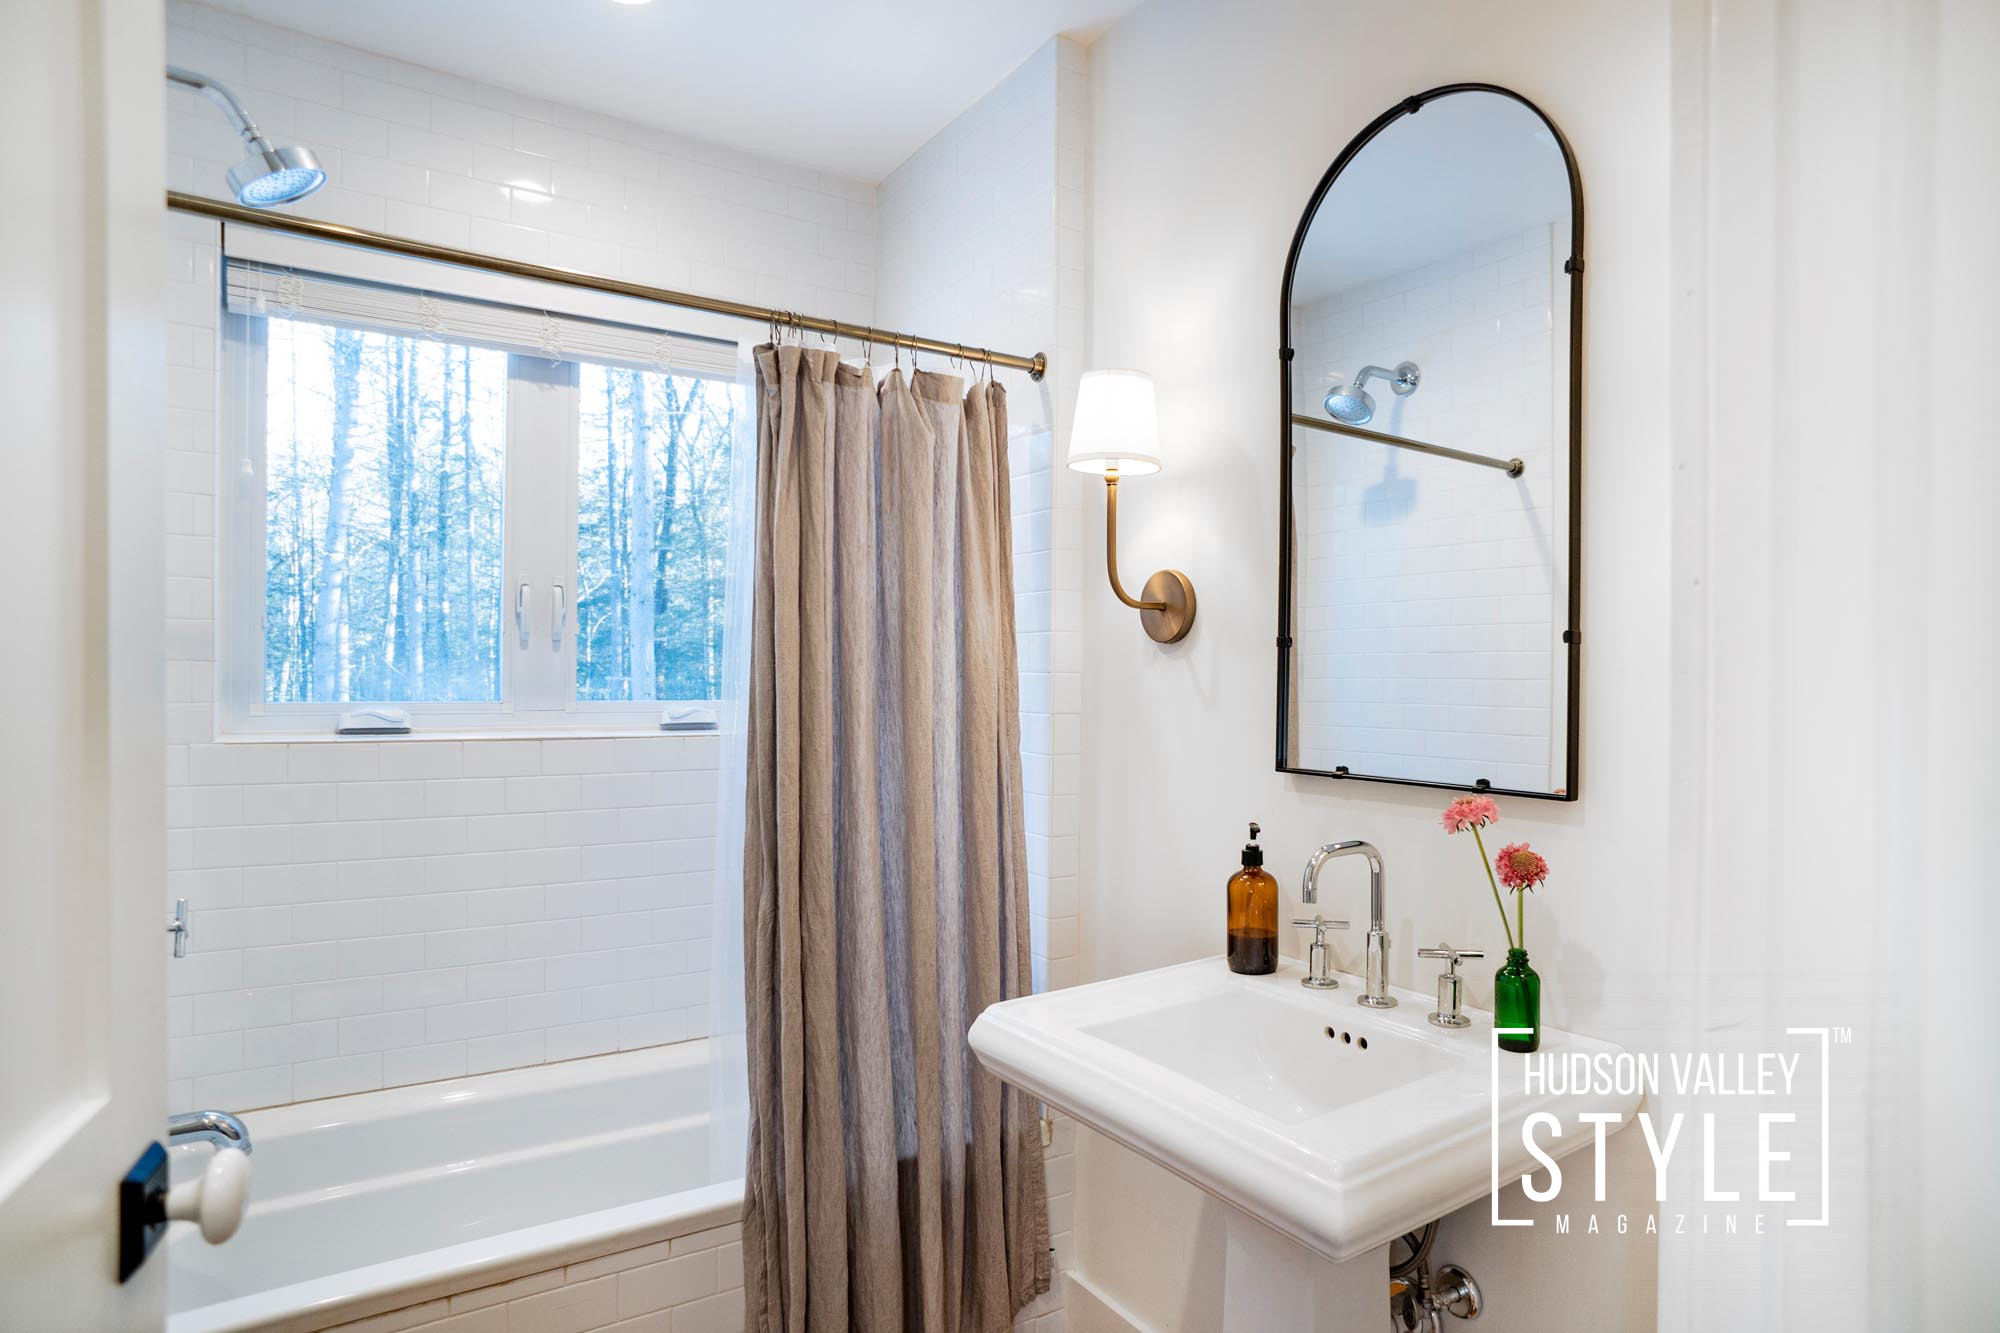 Discover the Contemporary Farmhouse in Catskill Mountains – Saugerties, NY Home for Sale – Real Estate Photography by Maxwell Alexander, Duncan Avenue Studios